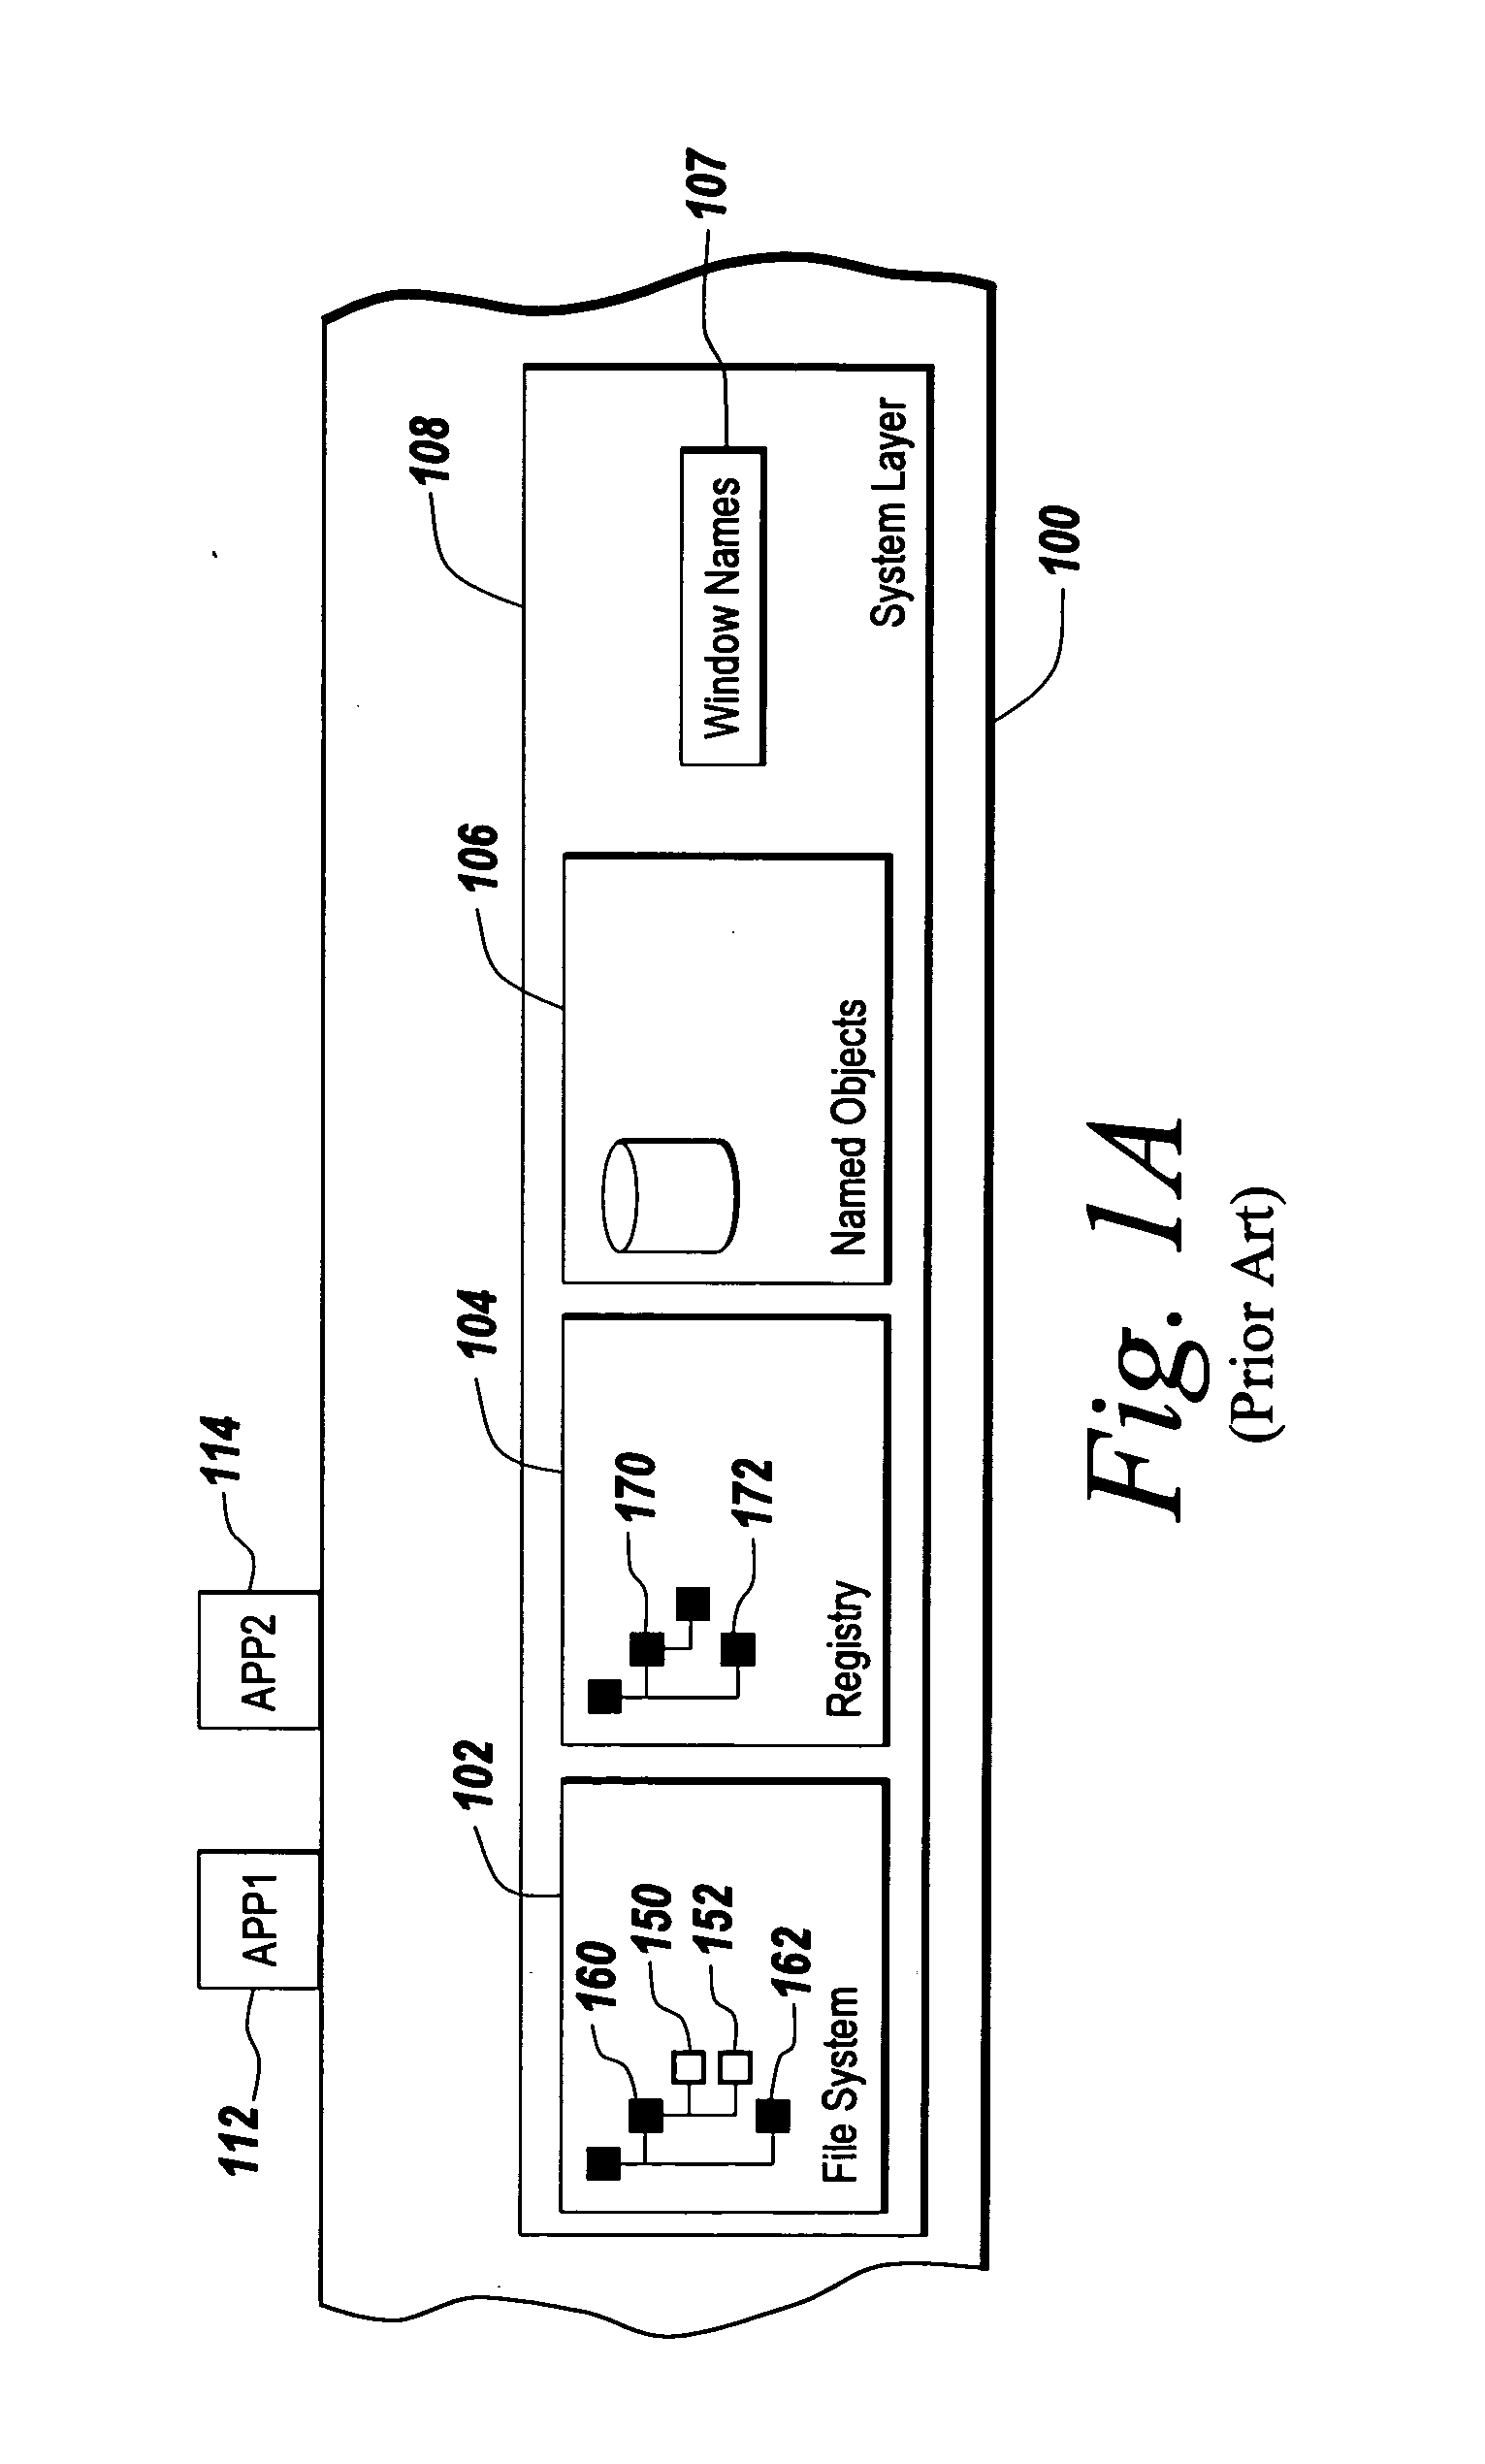 Method and apparatus for moving processes between isolation environments